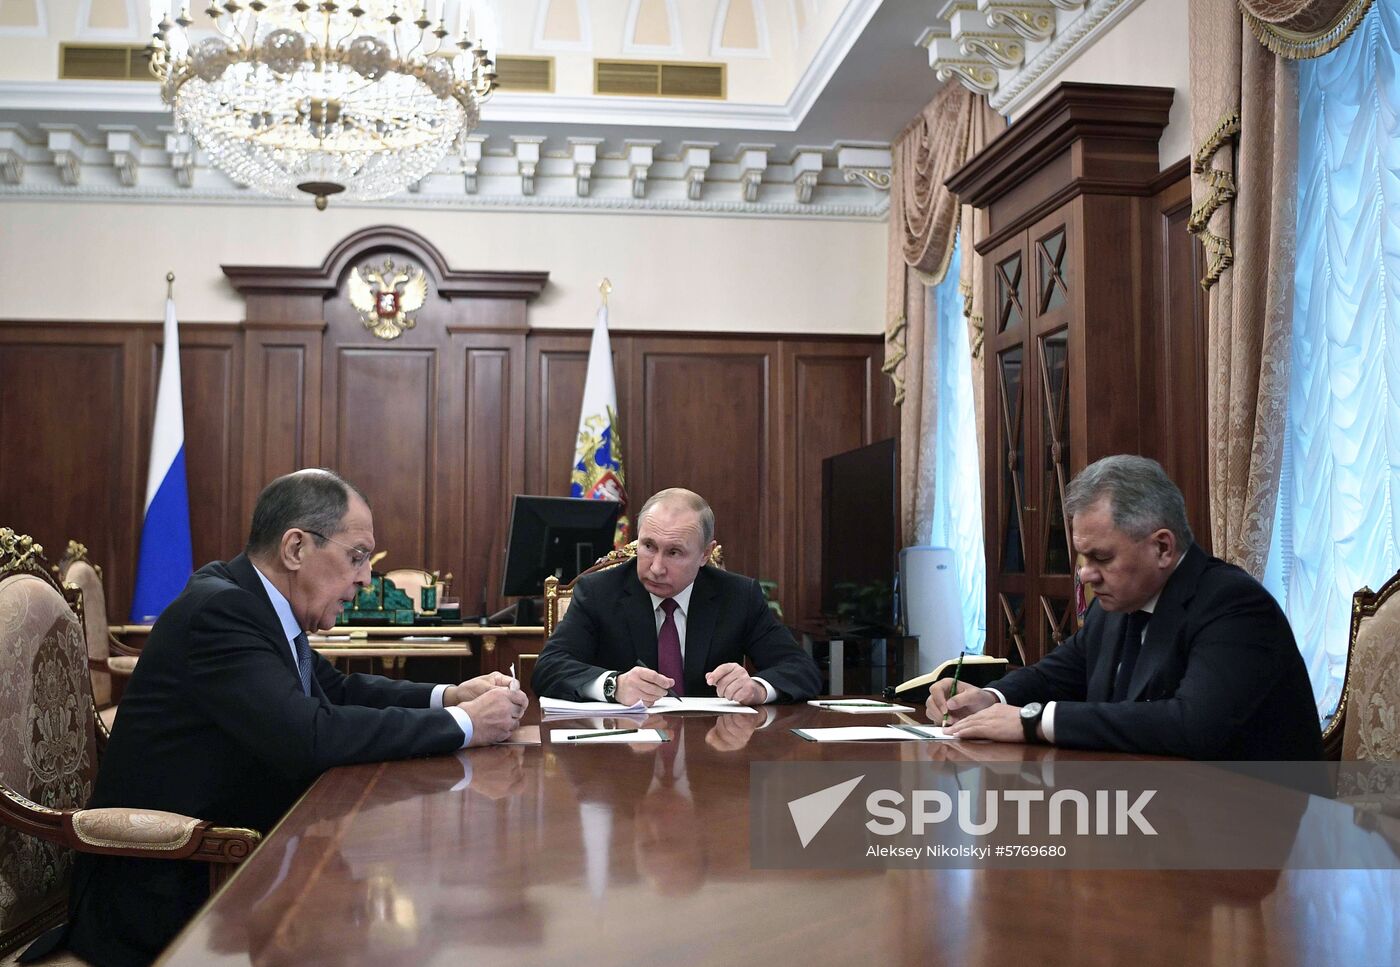 President Vladimir Putin meets with Foreign Minister Lavrov and Defence Minister Shoigu